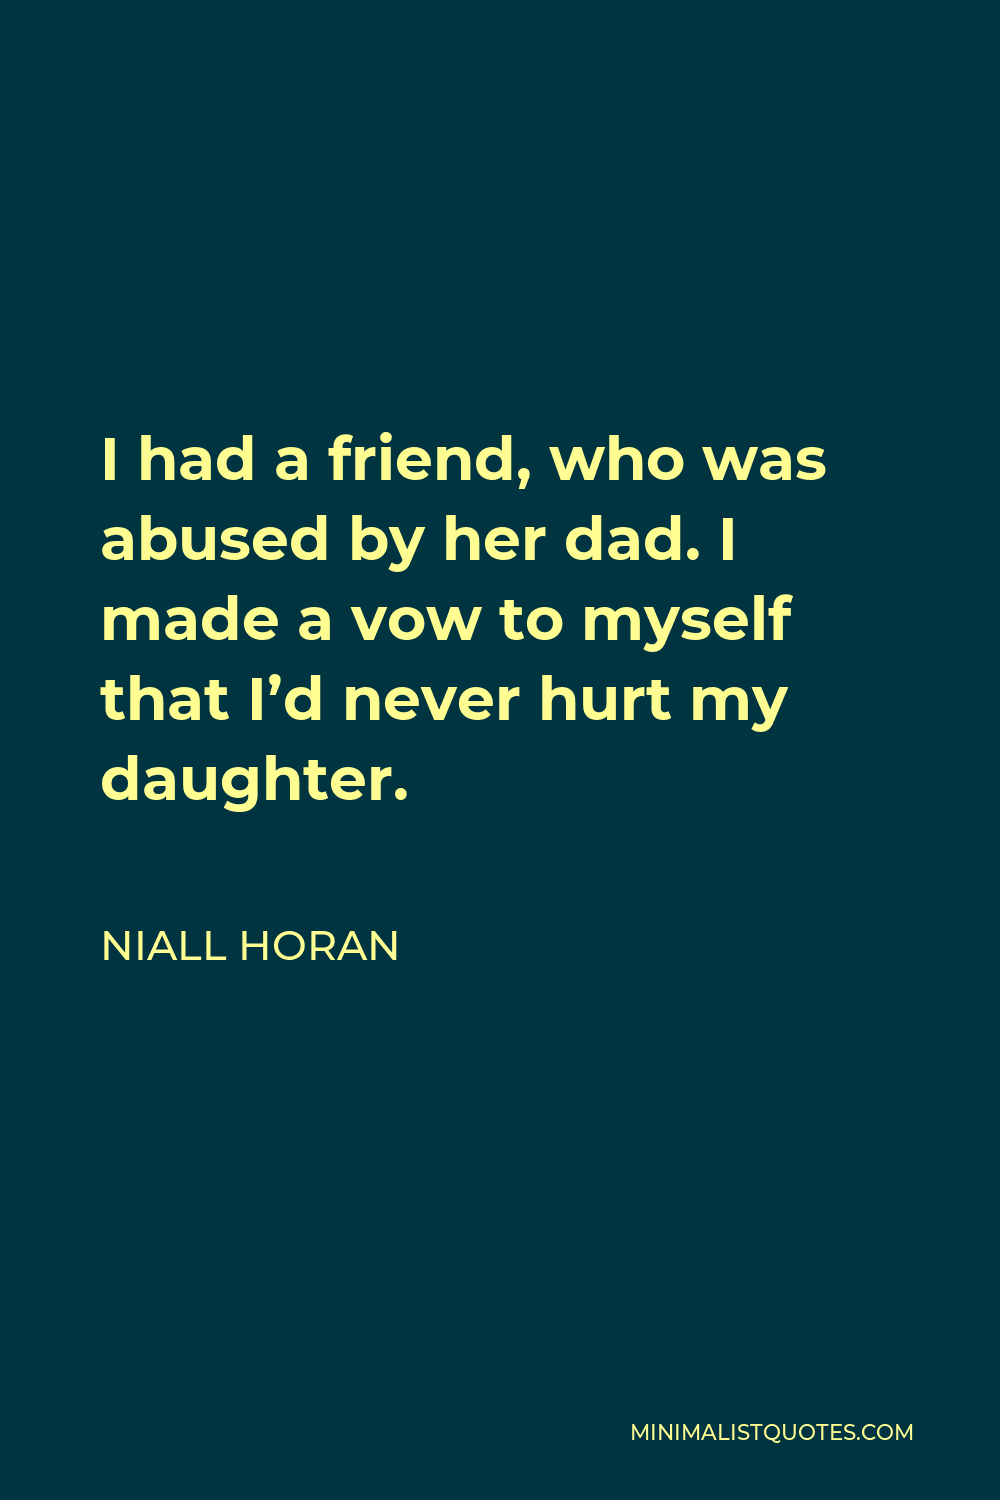 Niall Horan Quote - I had a friend, who was abused by her dad. I made a vow to myself that I’d never hurt my daughter.